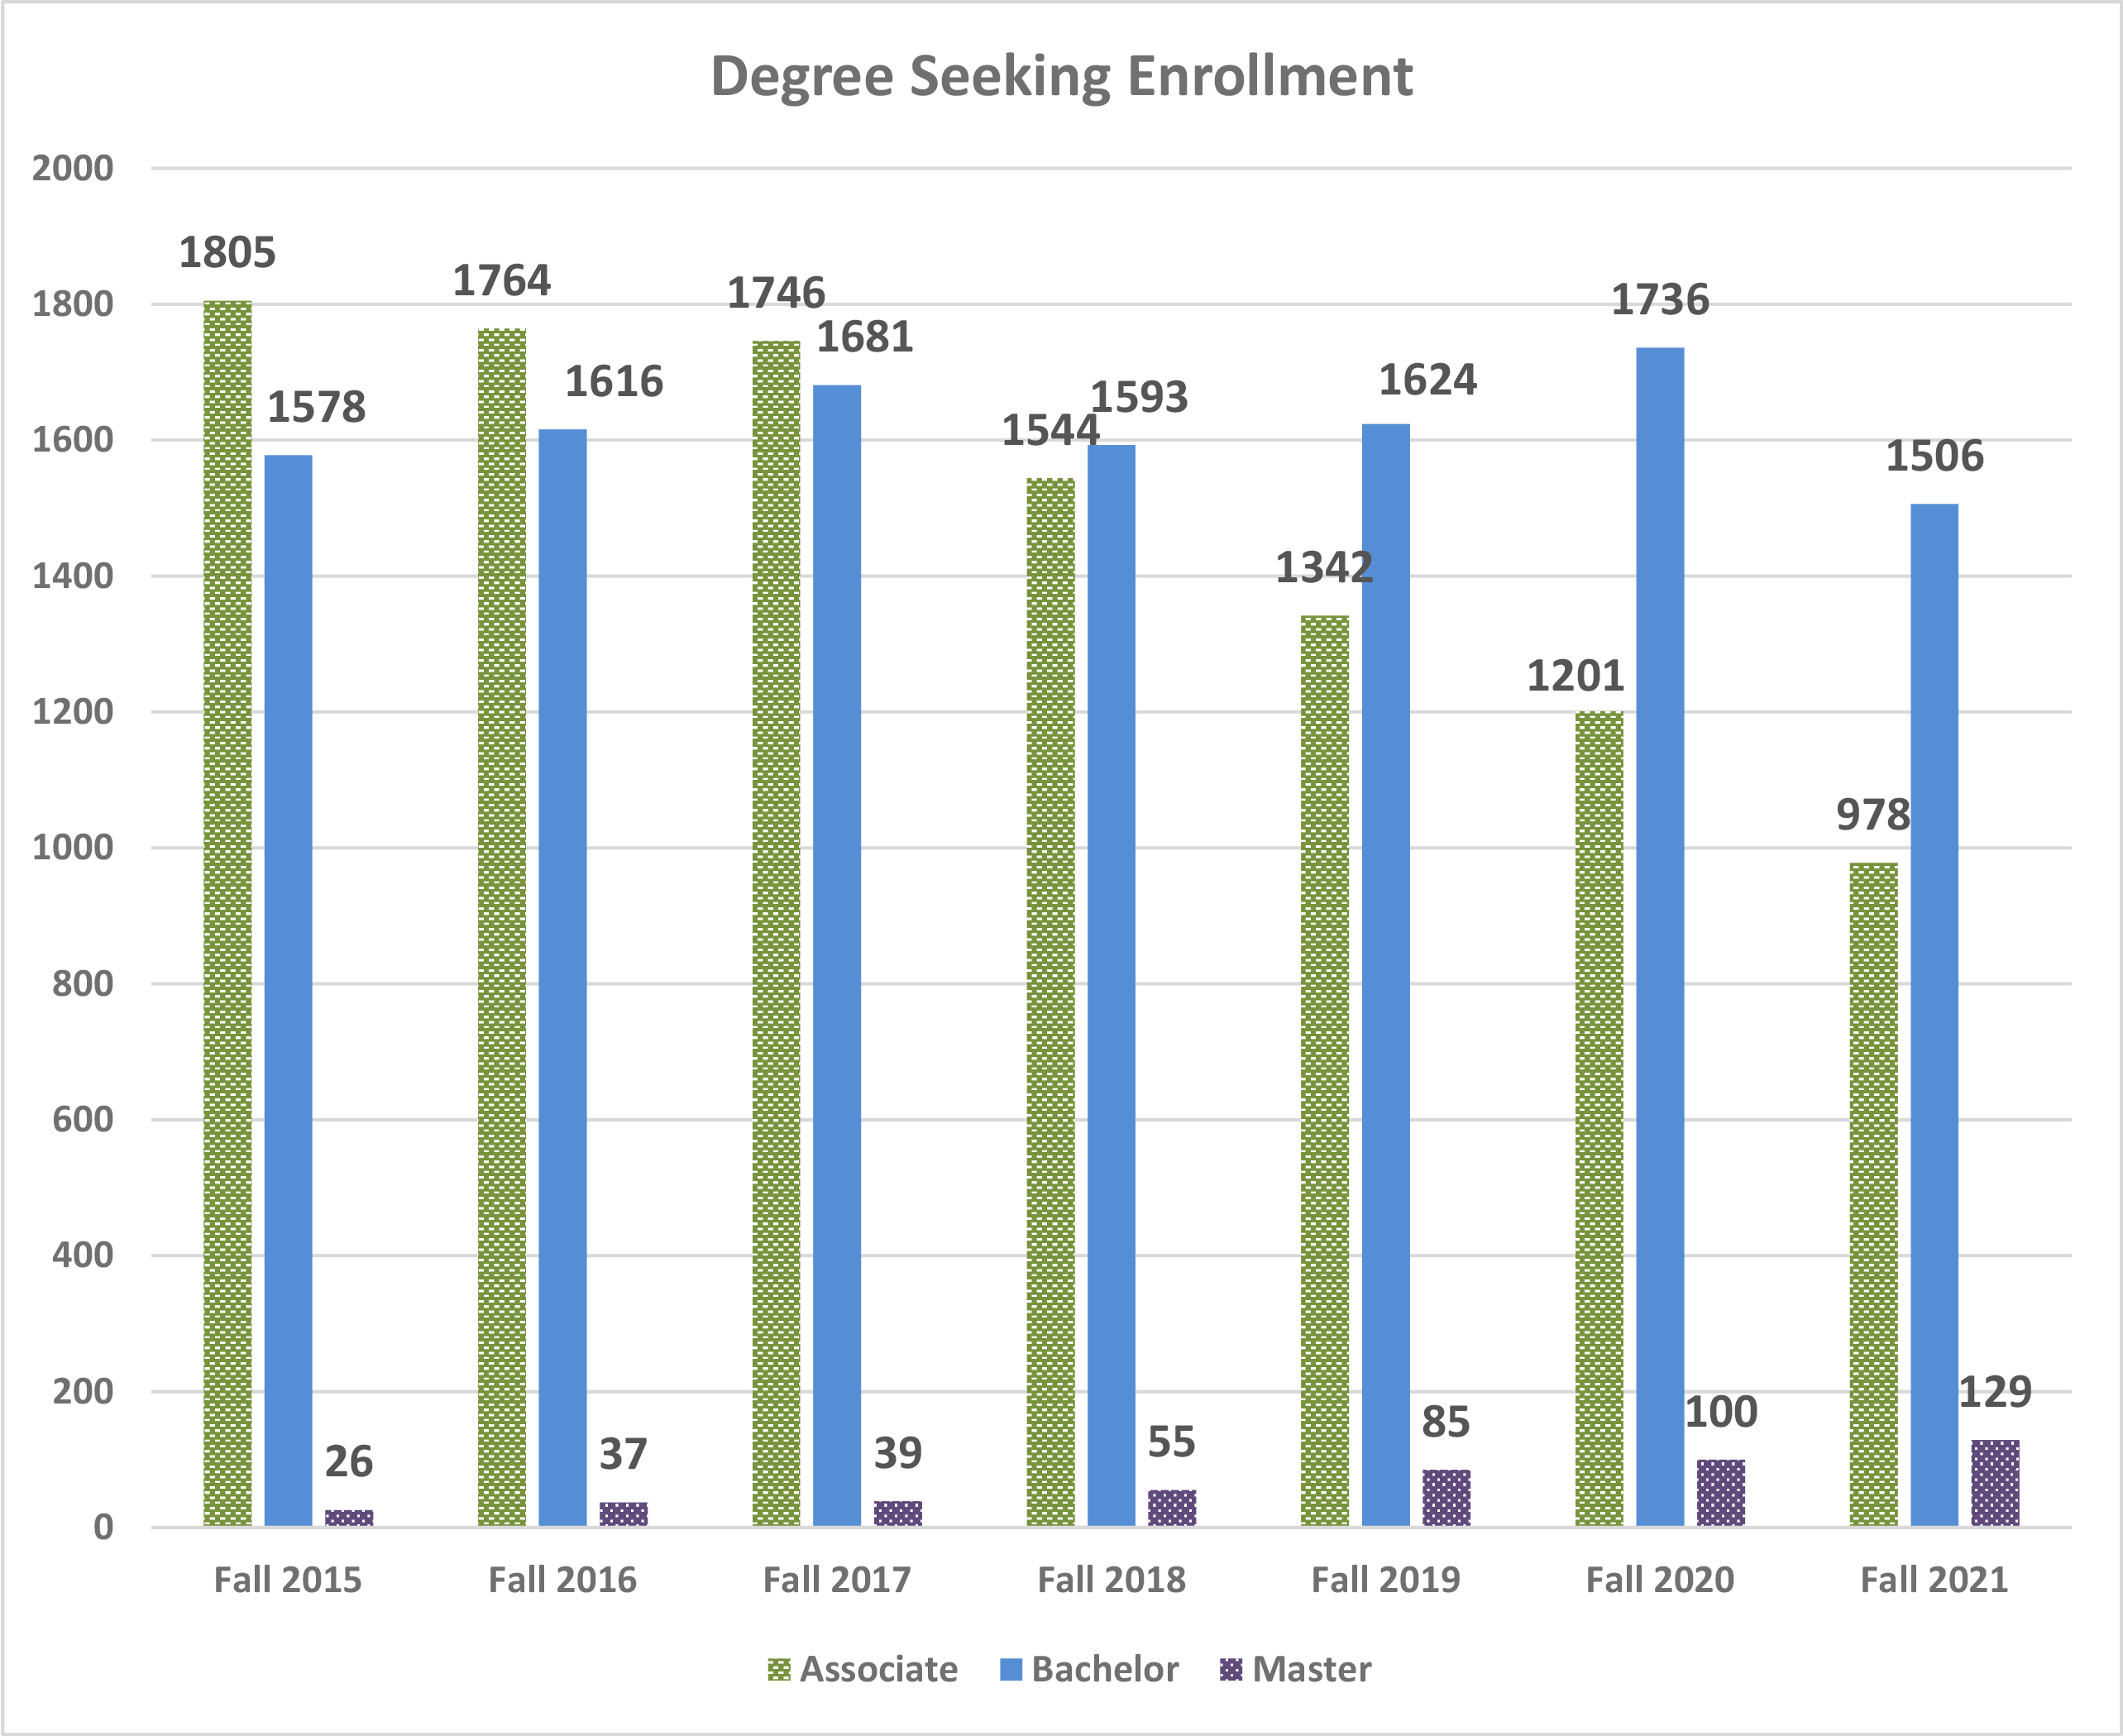 Bar graph showing the degree-seeking enrollment breakdown between Associate, Baccalaureate, and Master level programs. Please refer to summary and data table below. 